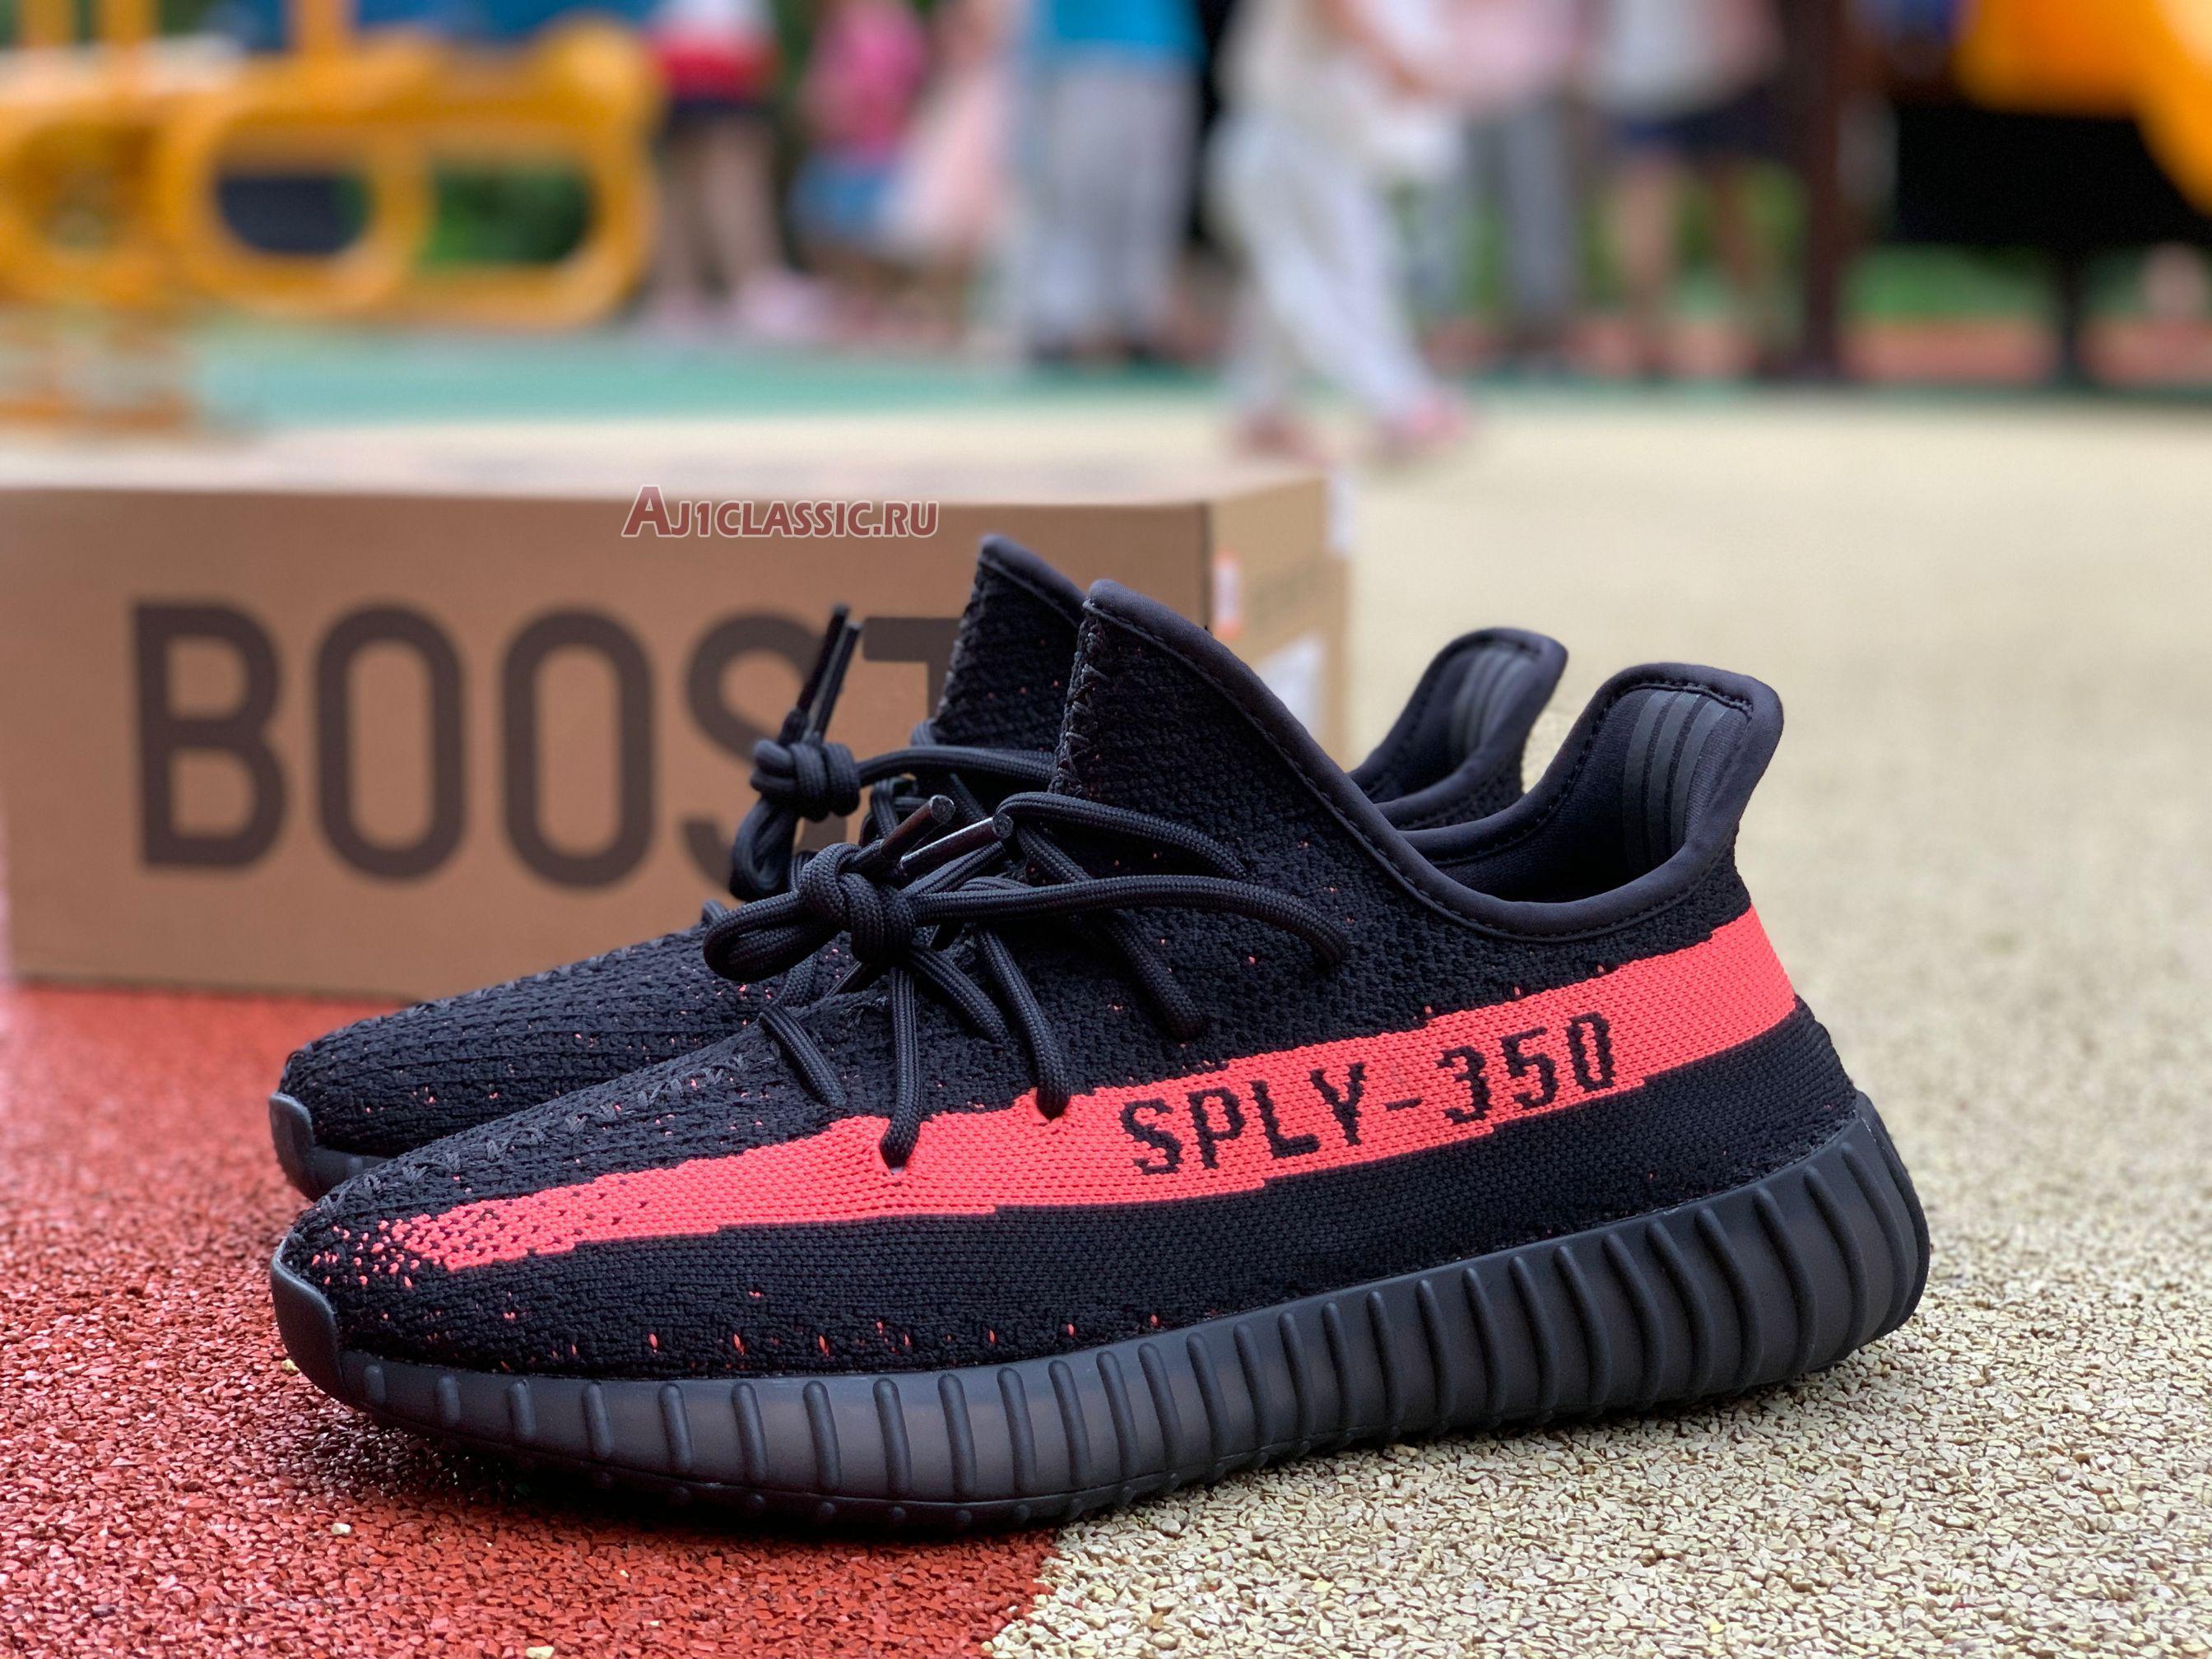 Adidas Yeezy Boost 350 V2 Red BY9612 Core Black/Red/Core Black Sneakers